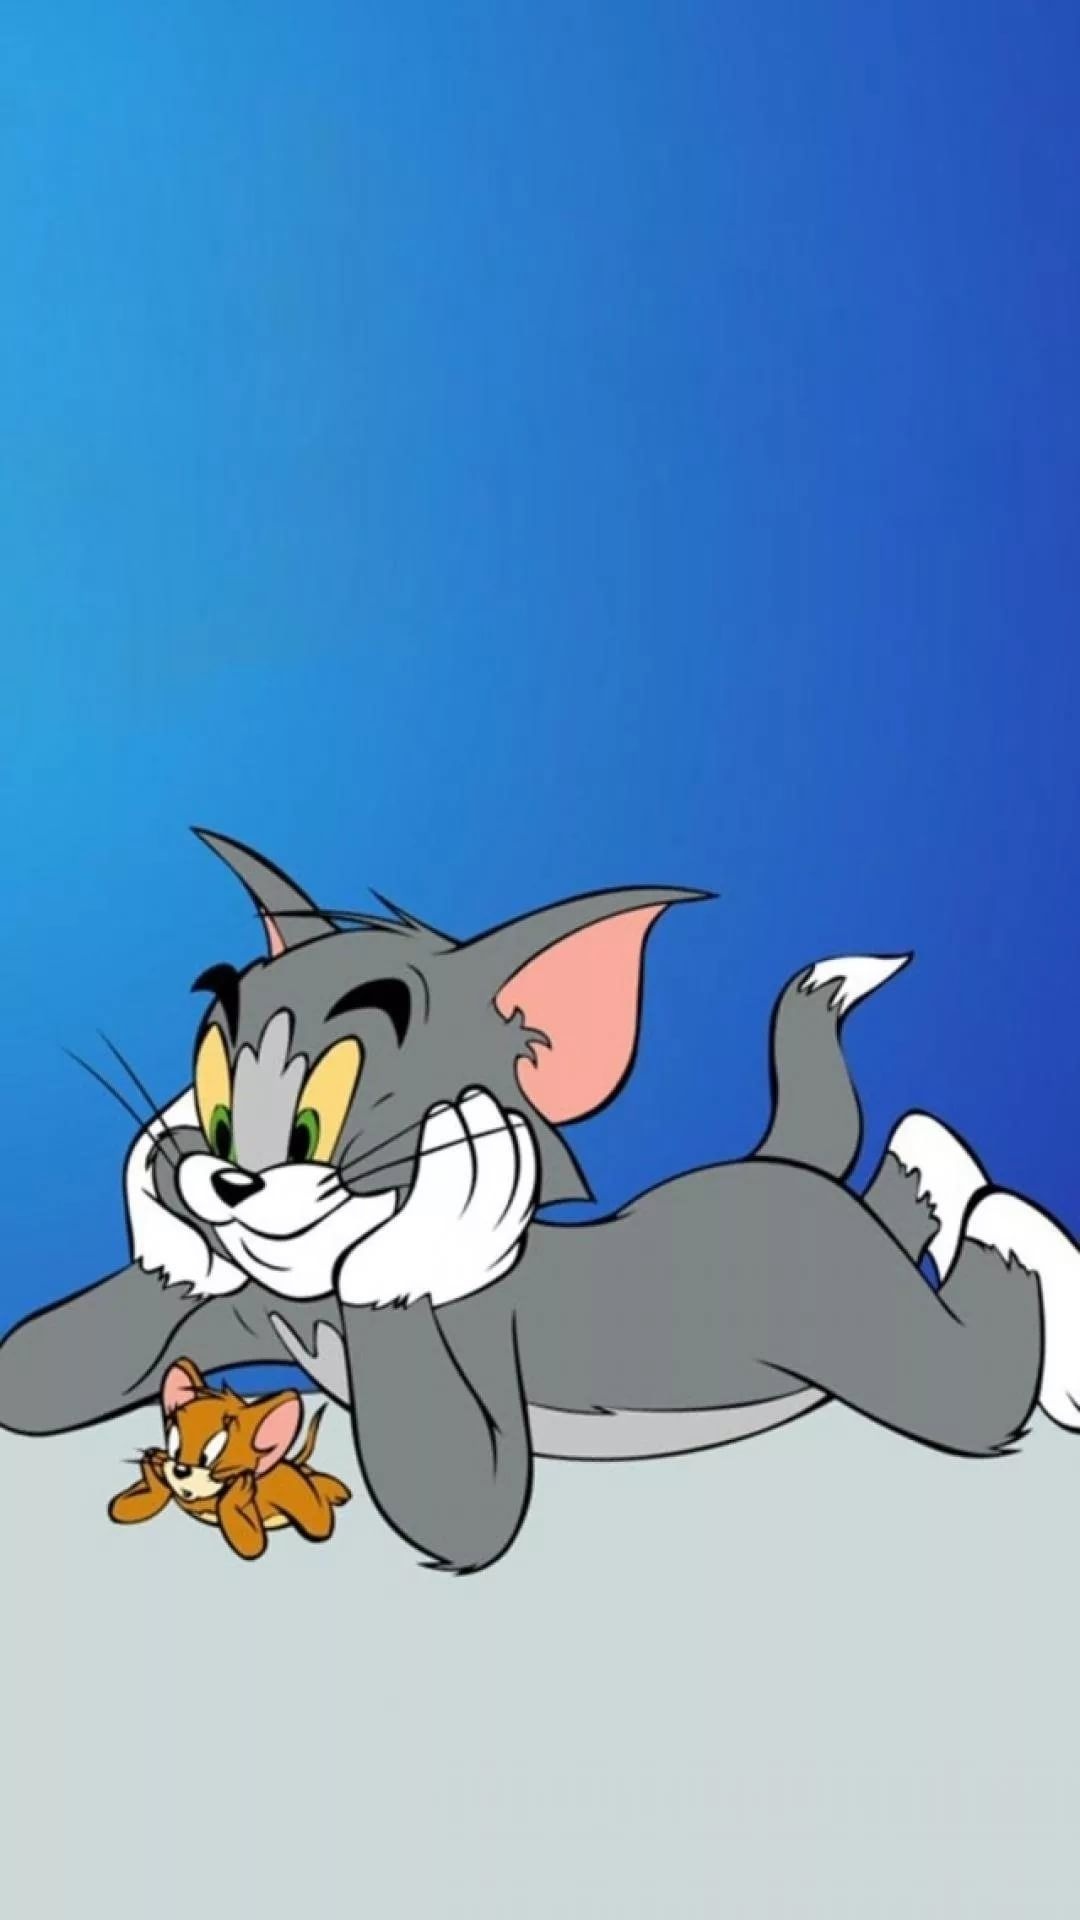 Tom and Jerry, Top quality wallpapers, HD 4K, 1080x1920 Full HD Handy